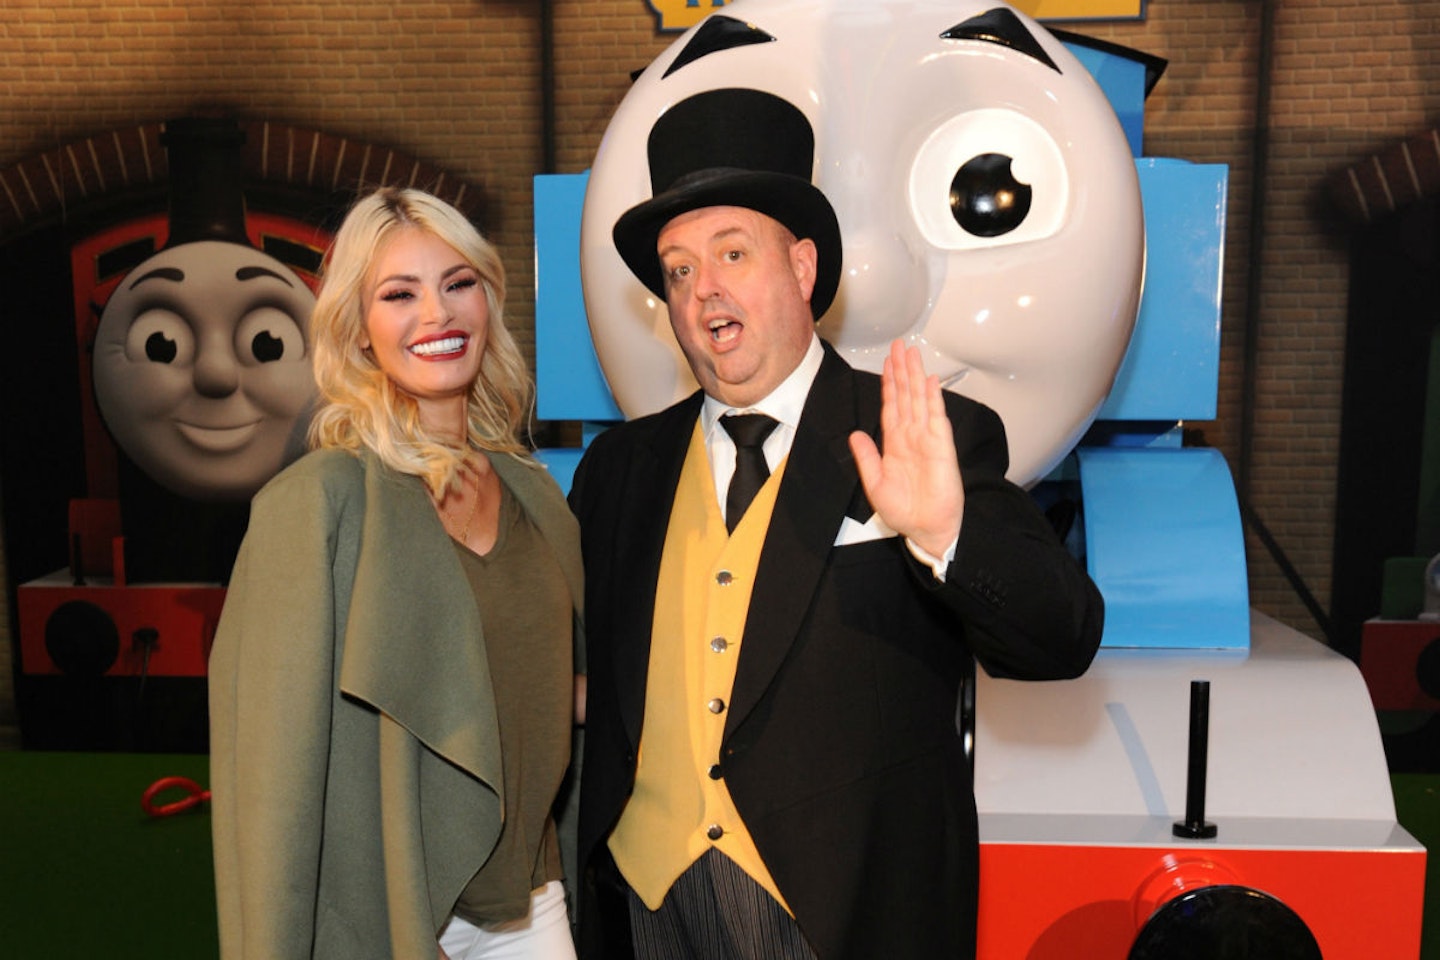 Chloe Sims enjoyed catching up with the Fat Controller at her Thomas The Tank Engine party